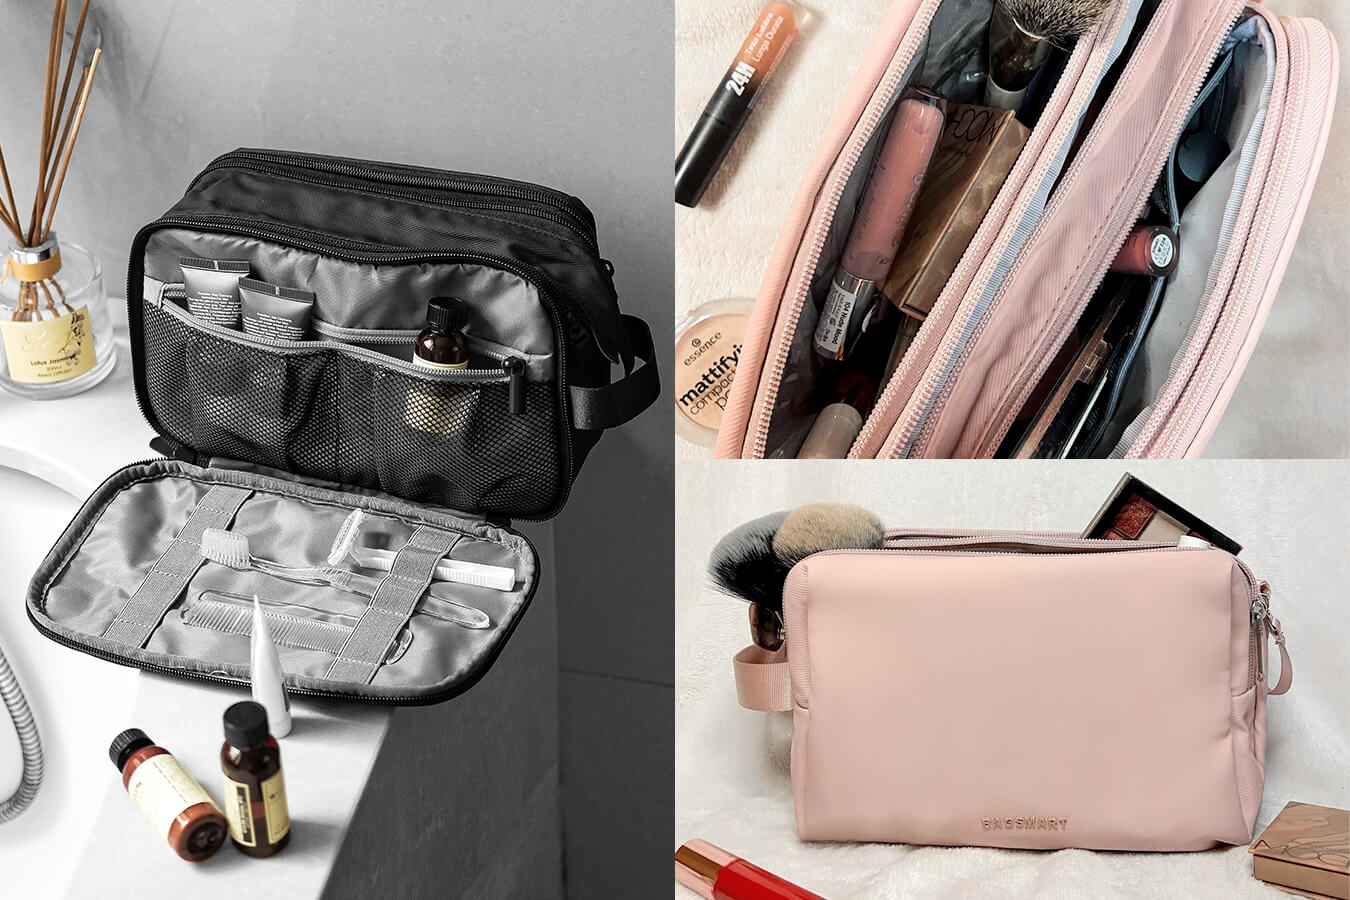 How to pack your toiletry Bag or dopp kit like a pro